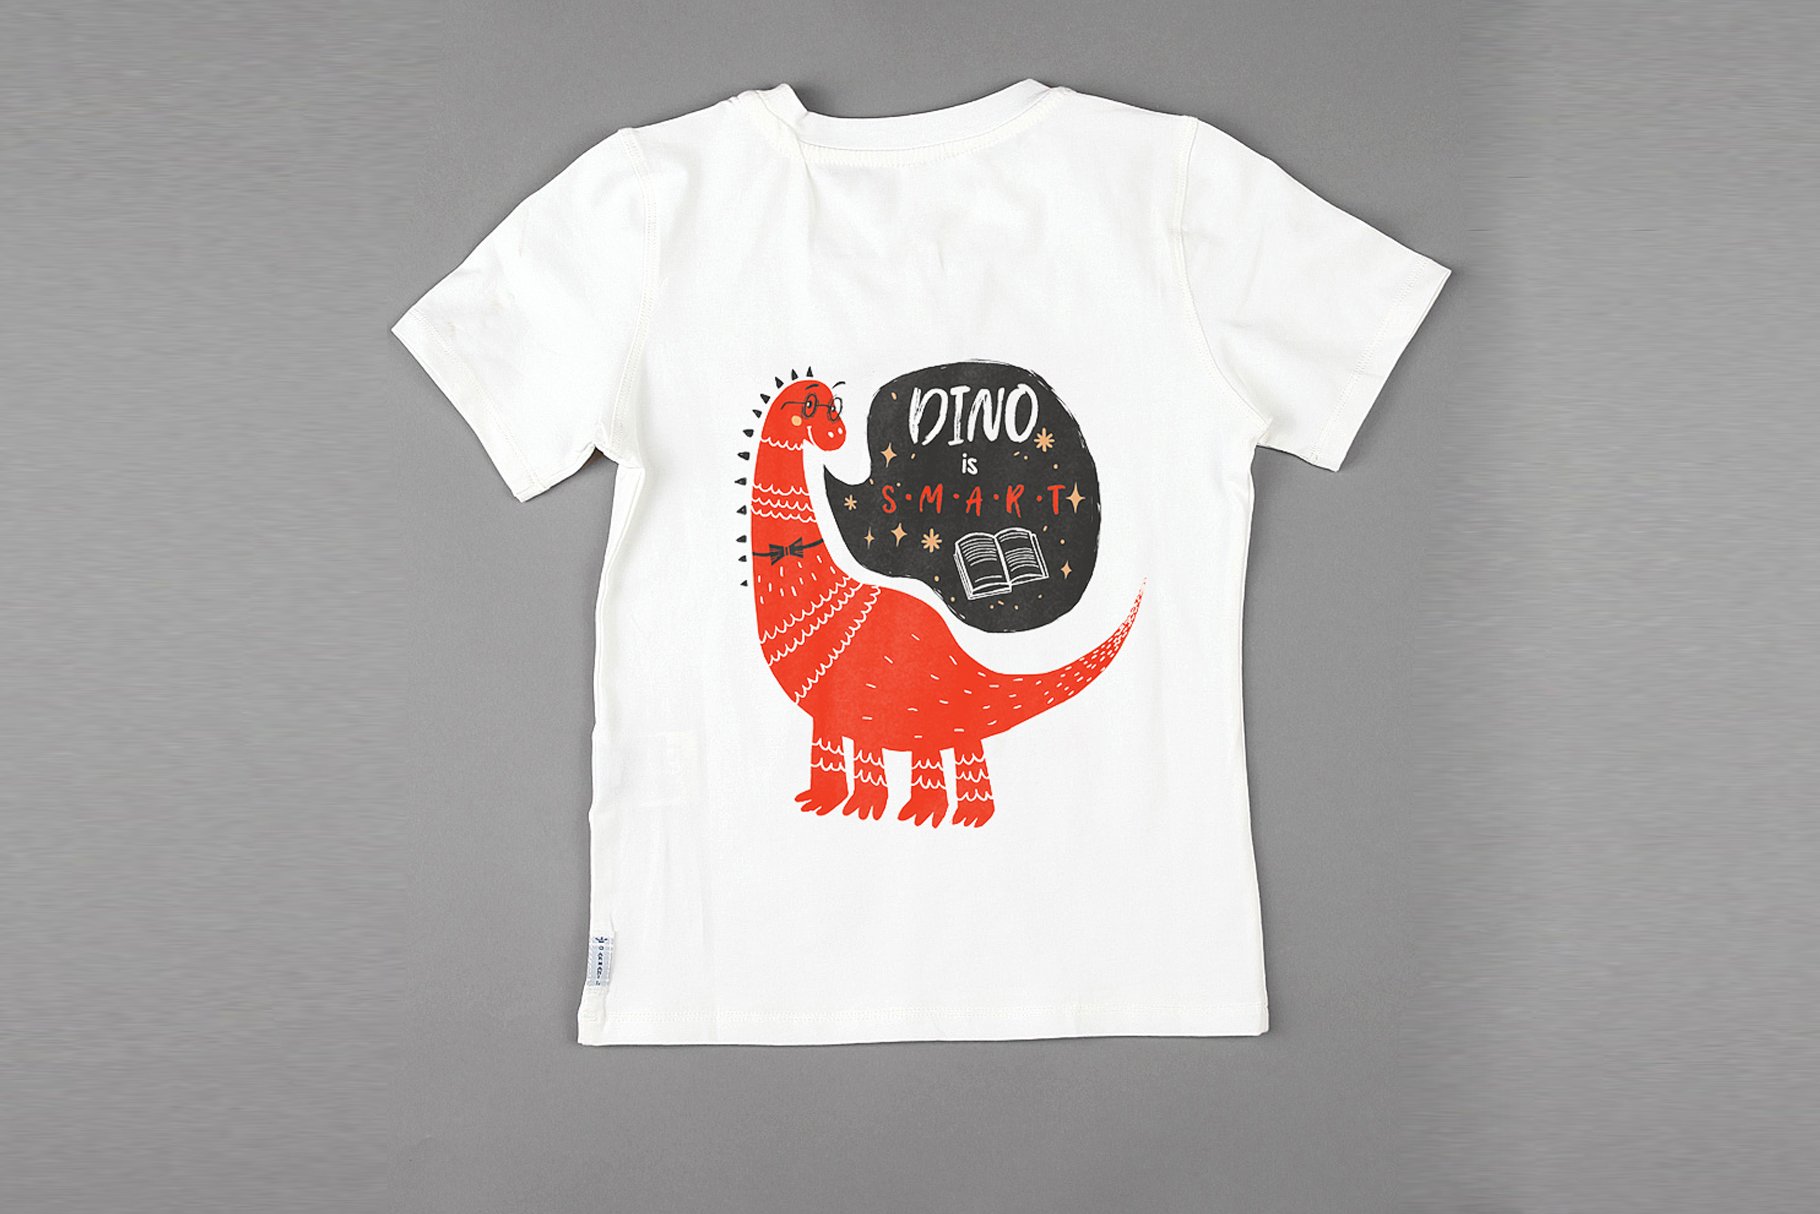 Classic and simple white t-shirt with the red dinosaur.